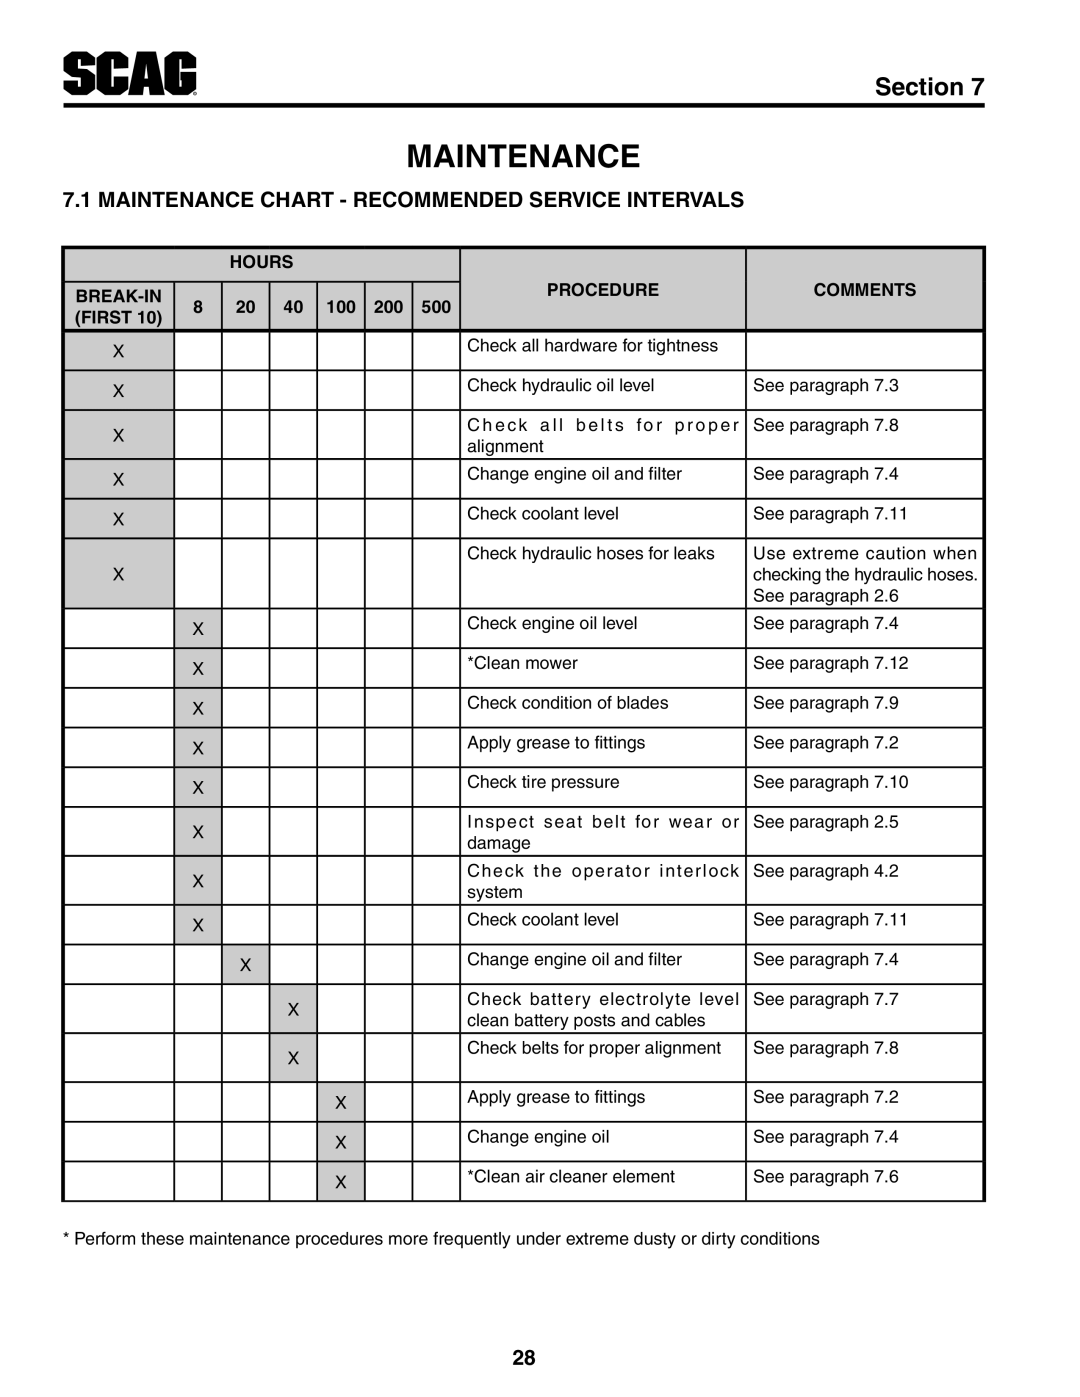 Scag Power Equipment STWC52V-26KA-LC, STWC52V-25KA manual Section, Maintenance Chart - Recommended Service Intervals 